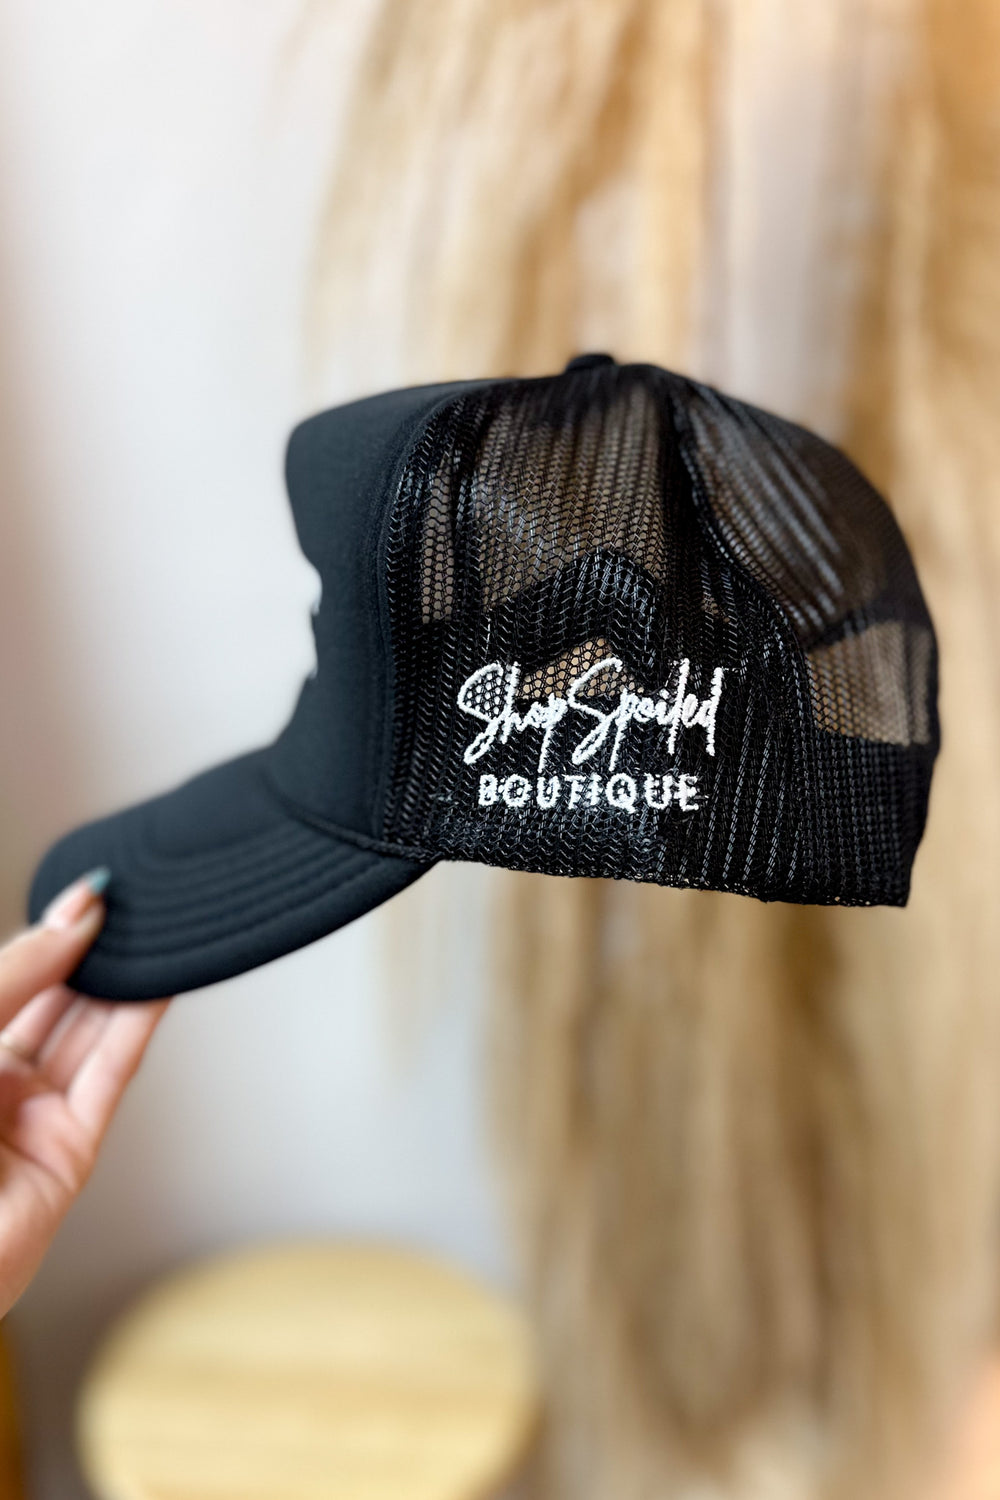 Put it on my Husbands Tab Trucker Hat - ShopSpoiled